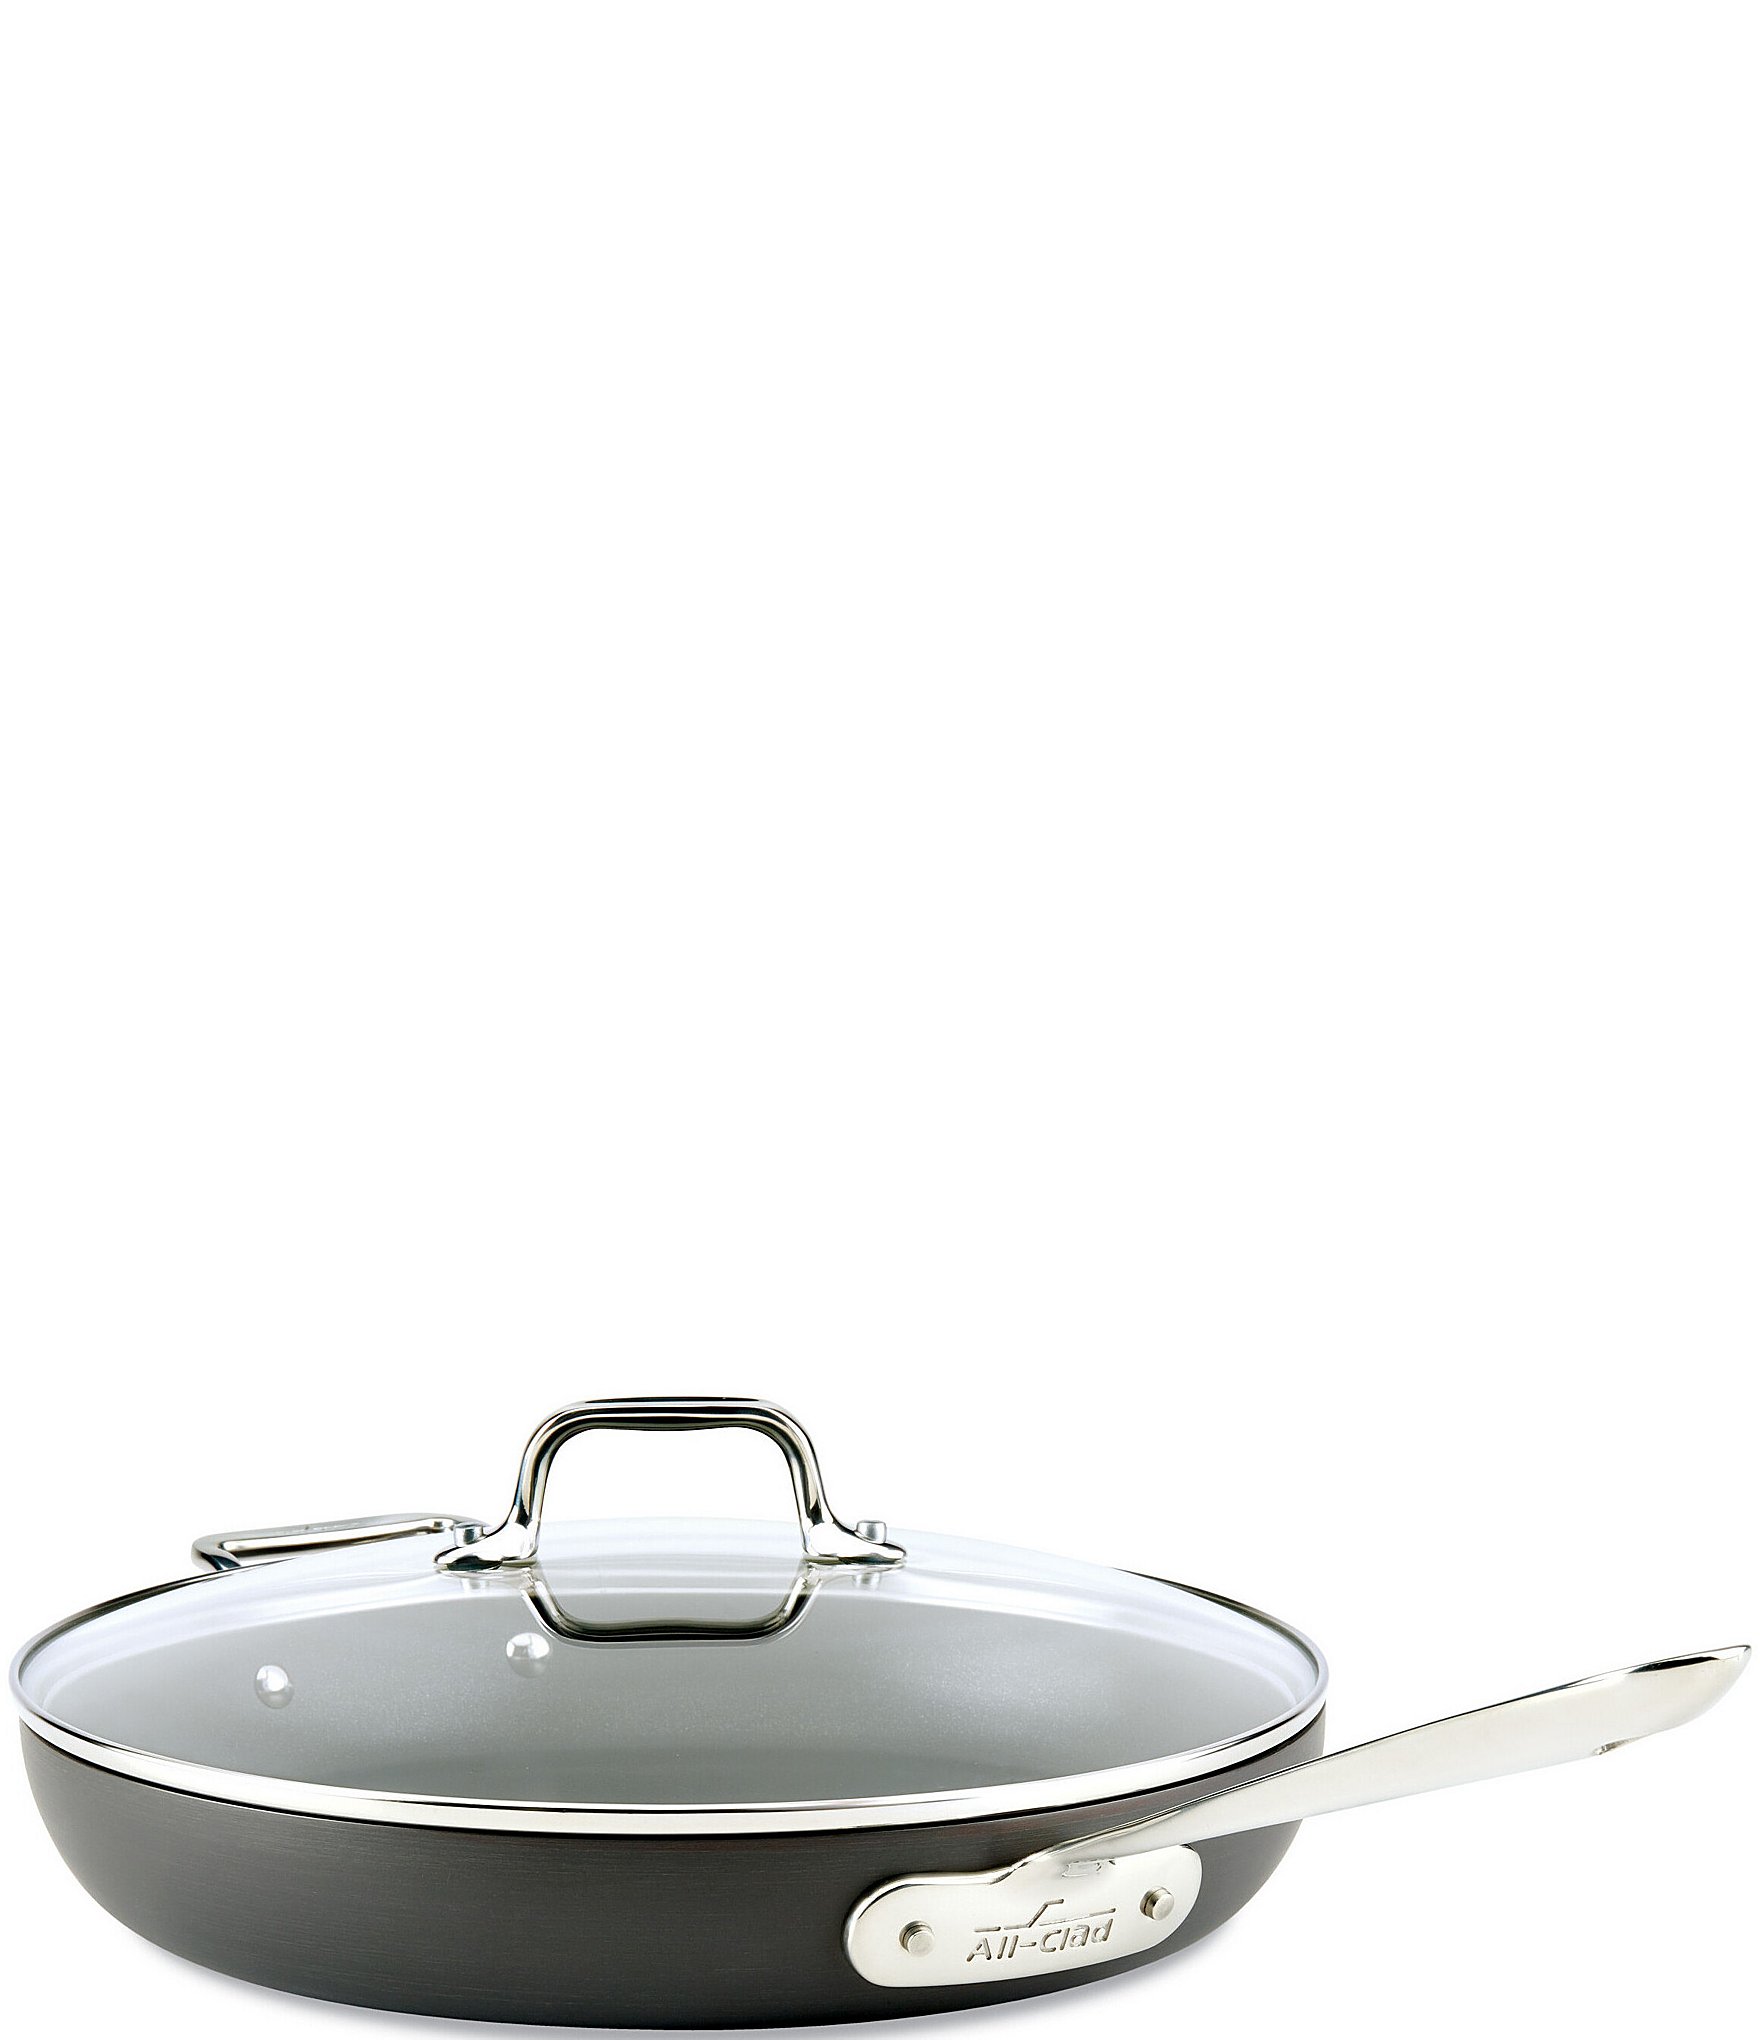 HA1 Nonstick Frypan Set with Lids 10 and 12 inch